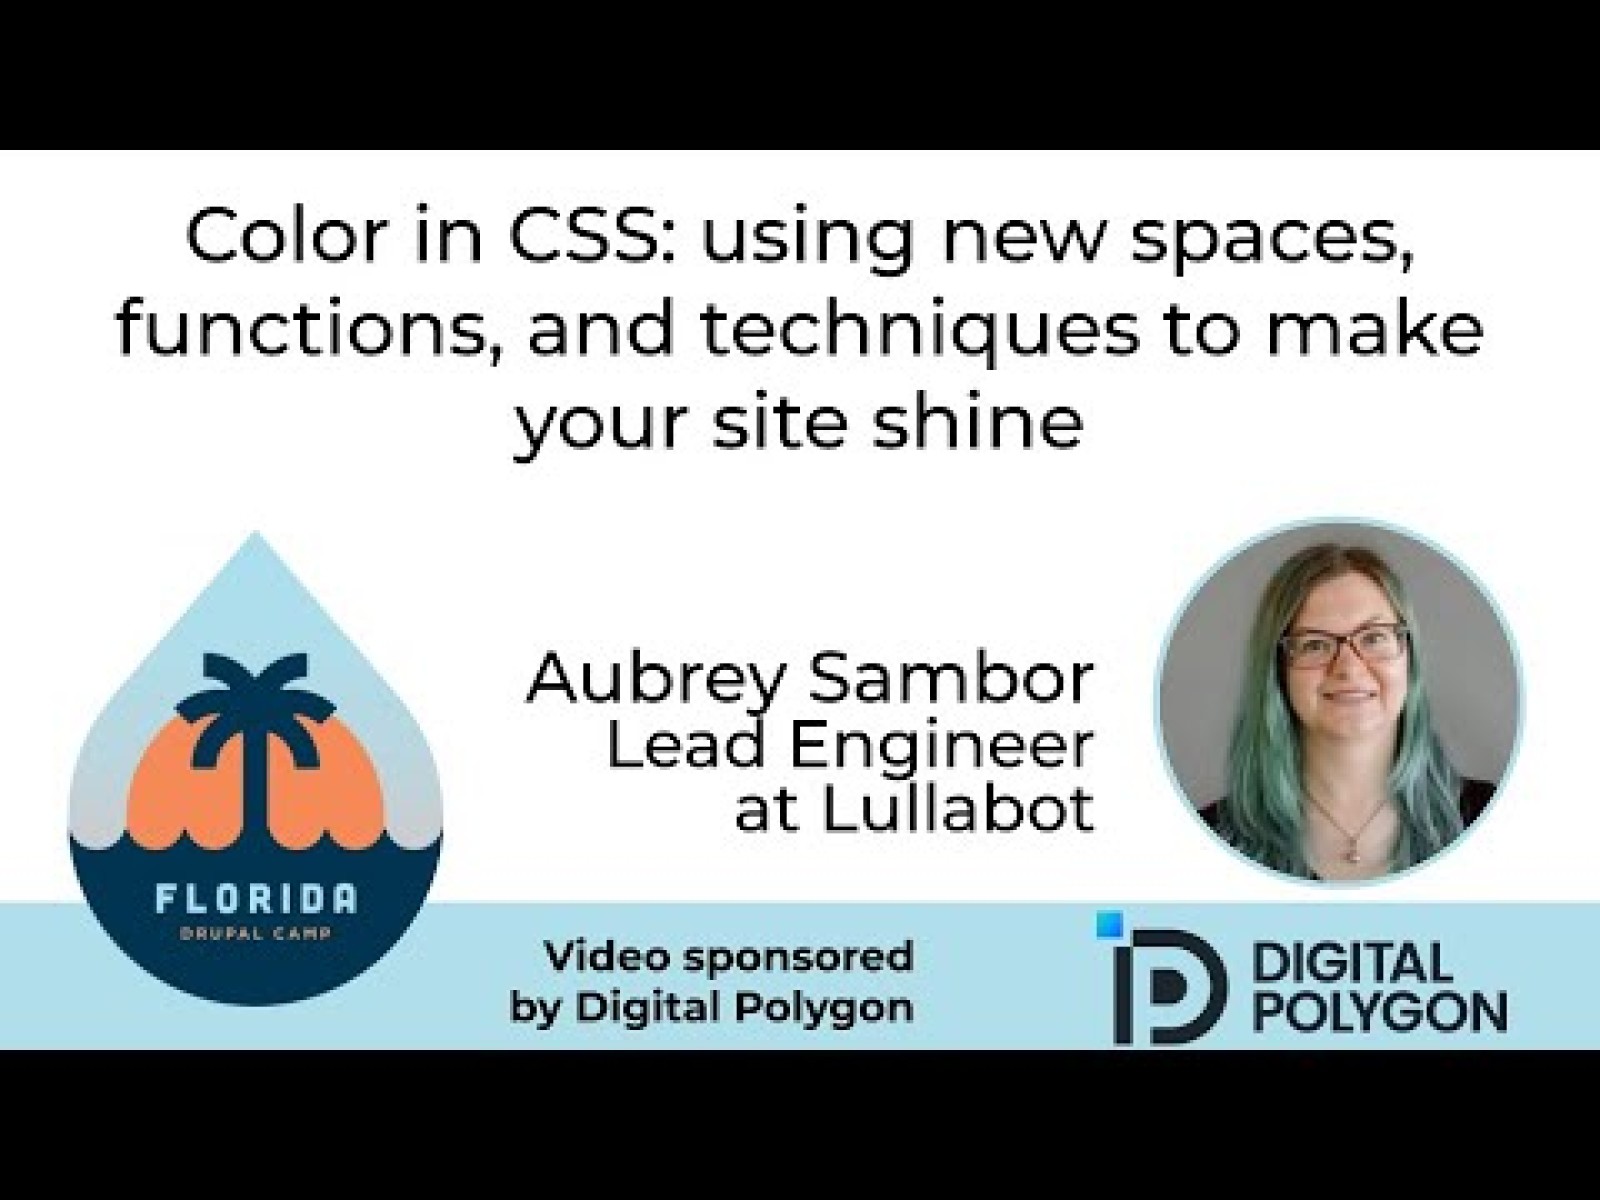 Color in CSS: Using New Spaces, Functions, and Techniques to Make your Site Shine